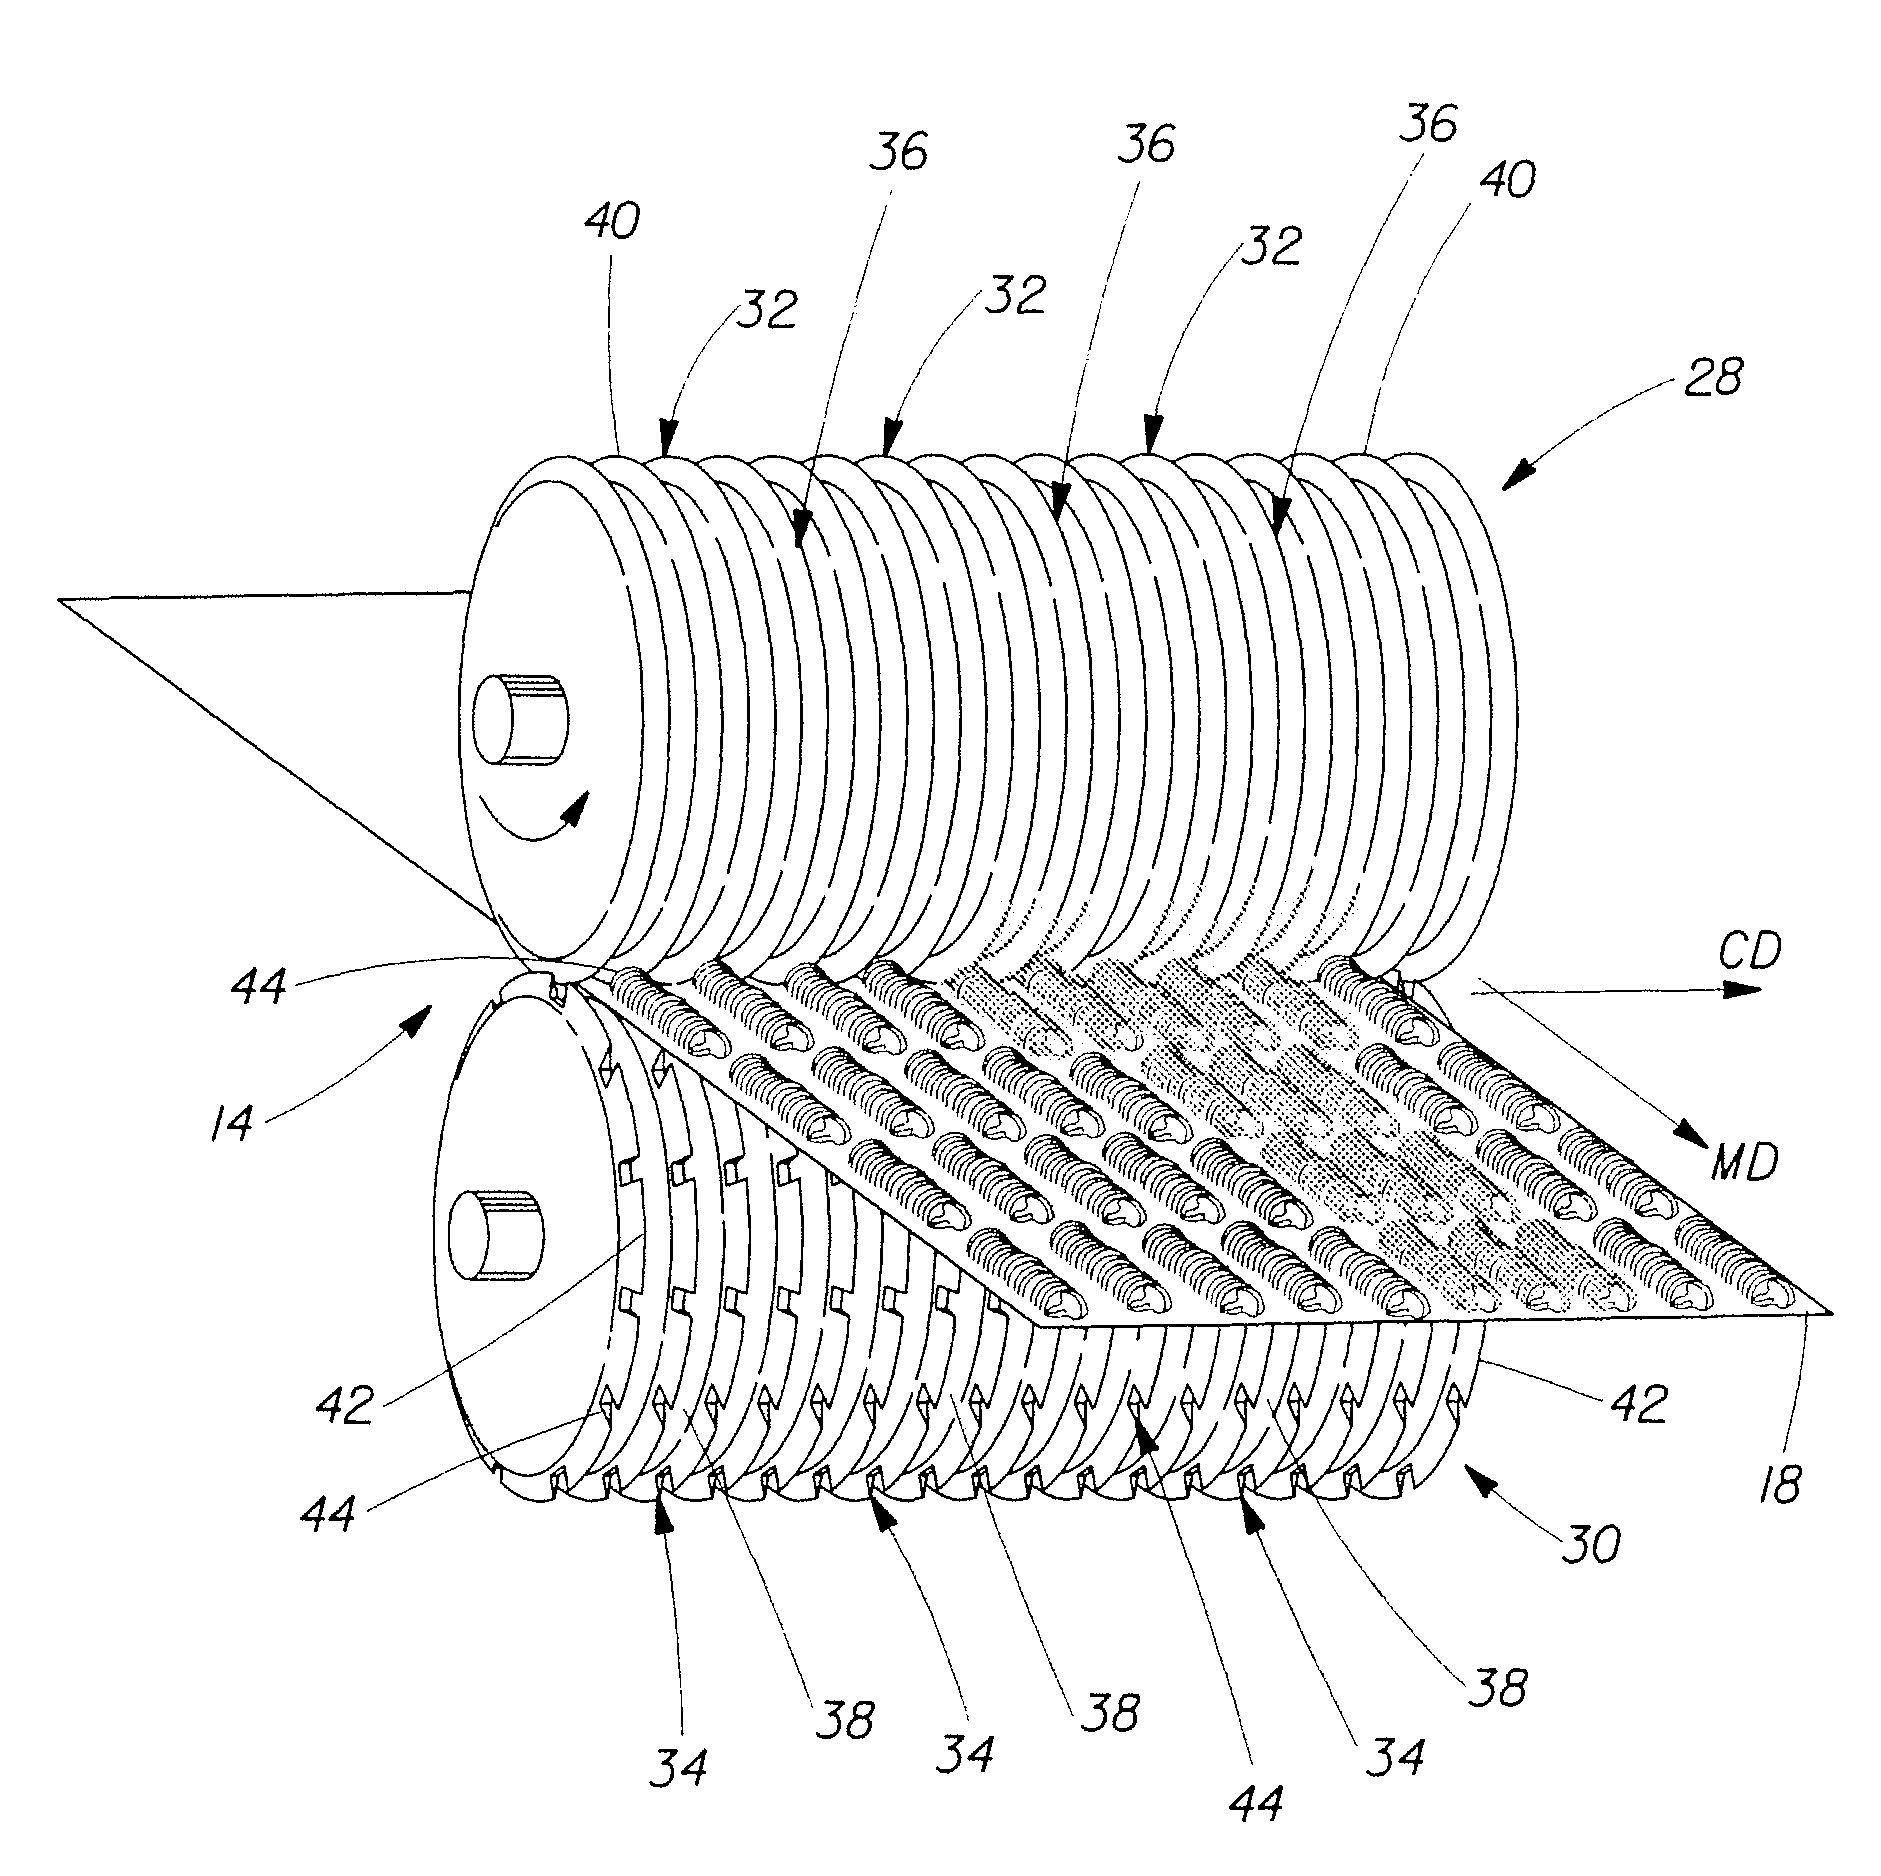 Apparatus for producing a web substrate having indicia disposed thereon and elastic-like behavior imparted thereto